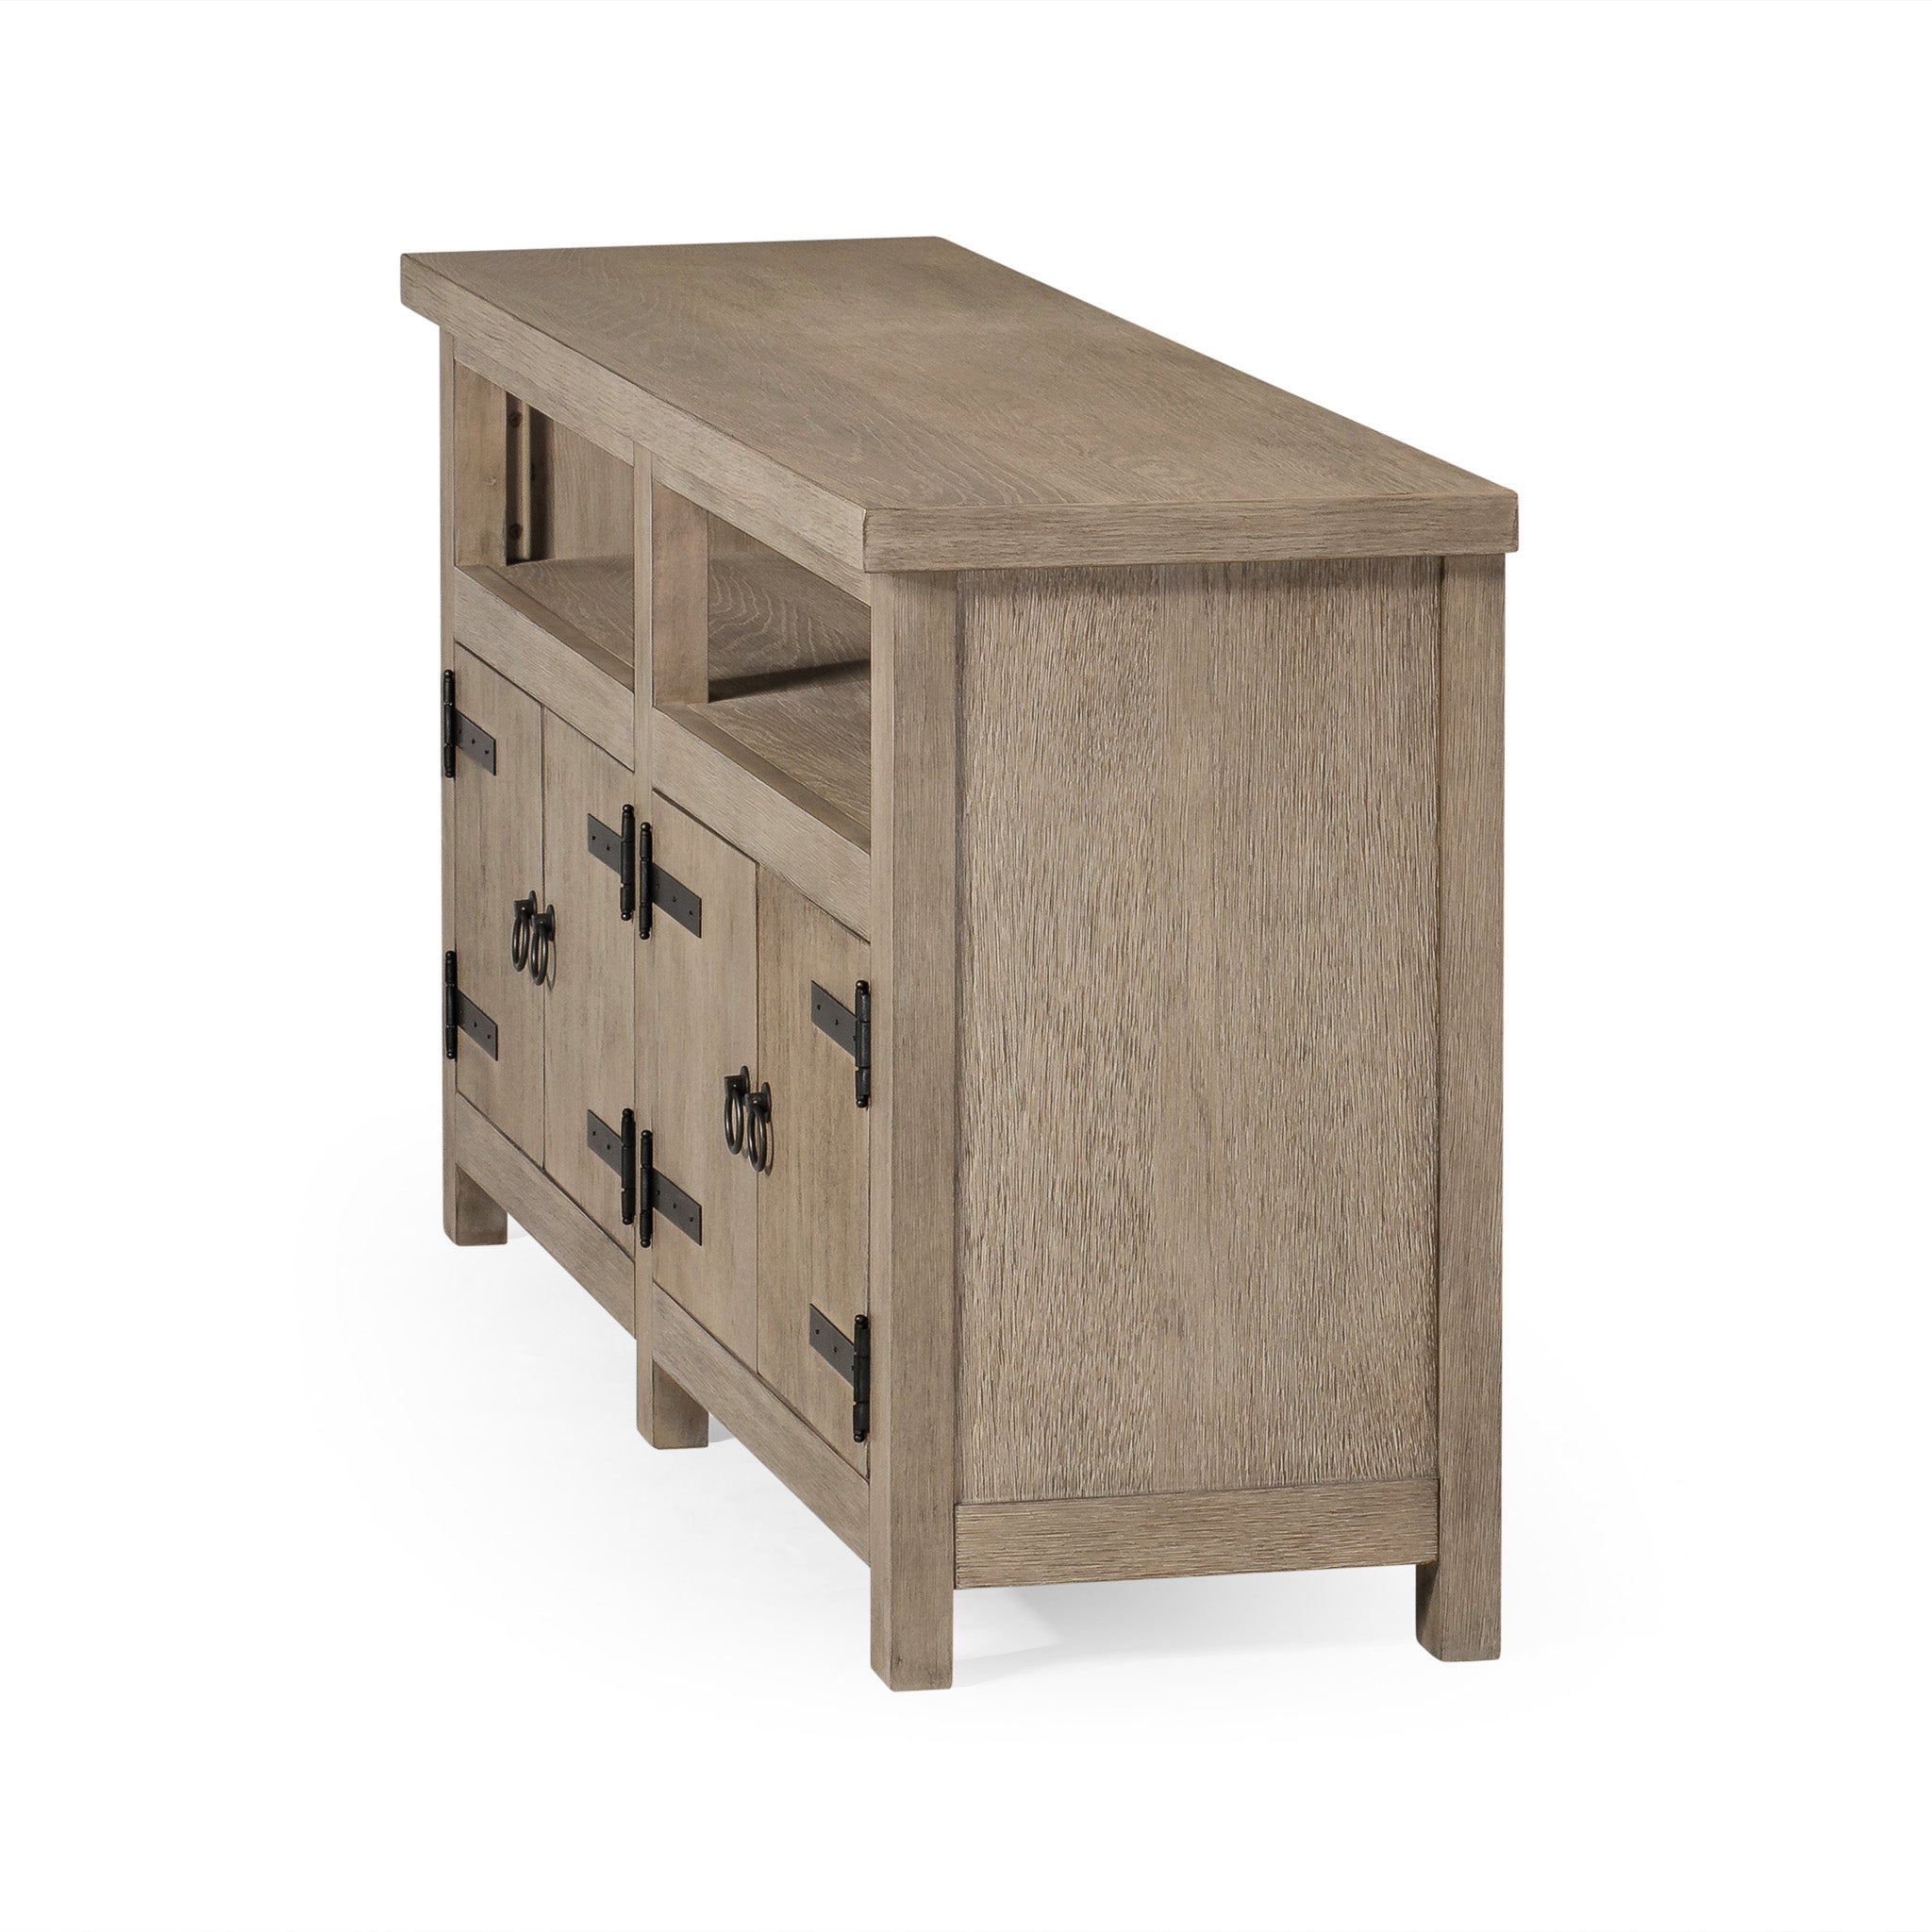 Luca Organic Wooden Media Unit in Weathered Grey Finish in Media Units by Maven Lane